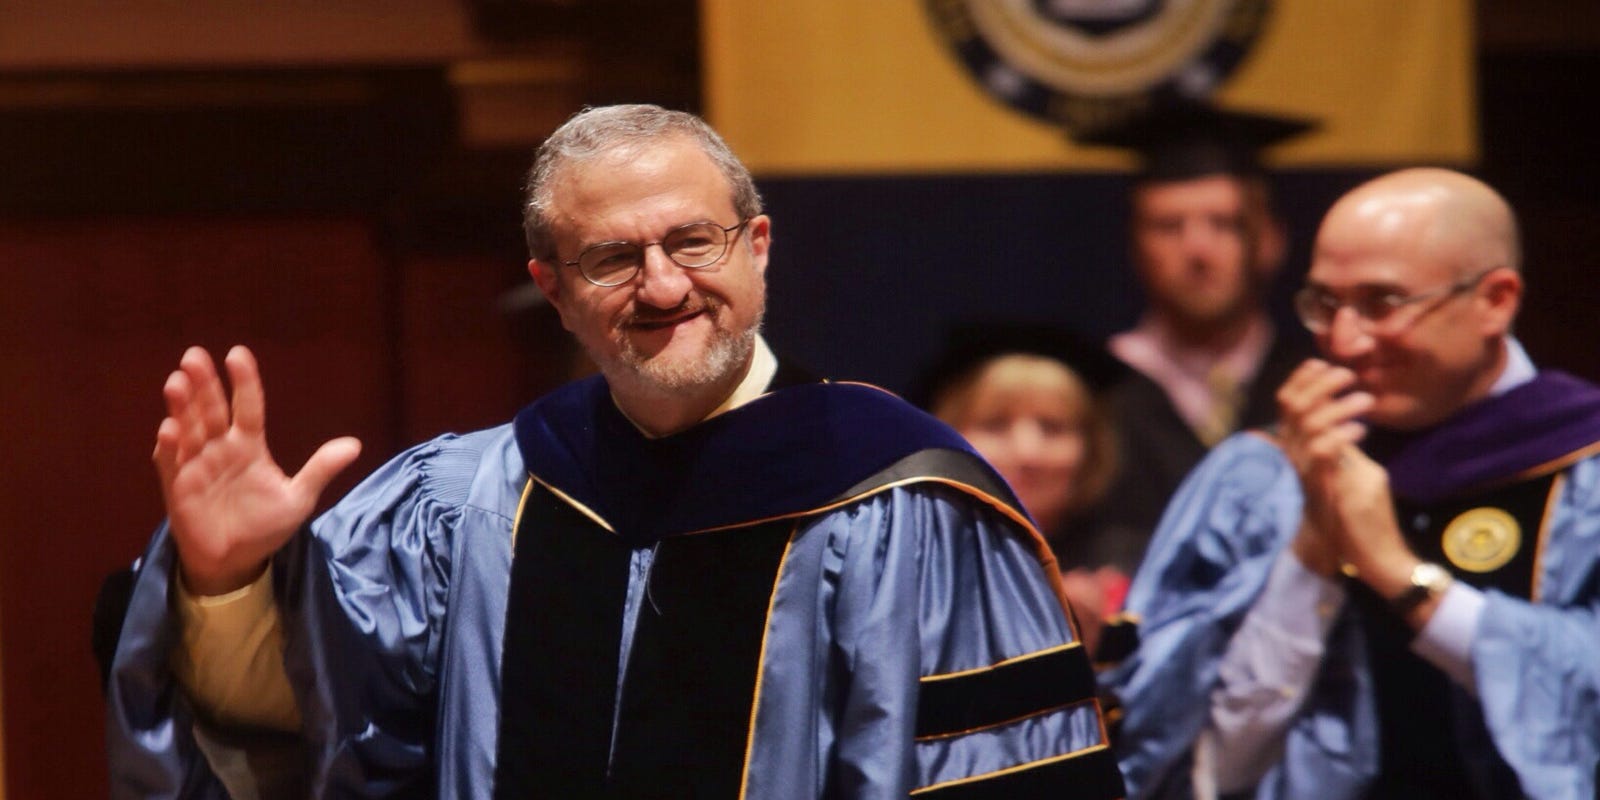 University of Michigan President Mark Schlissel in graduation robes at commencement ceremony